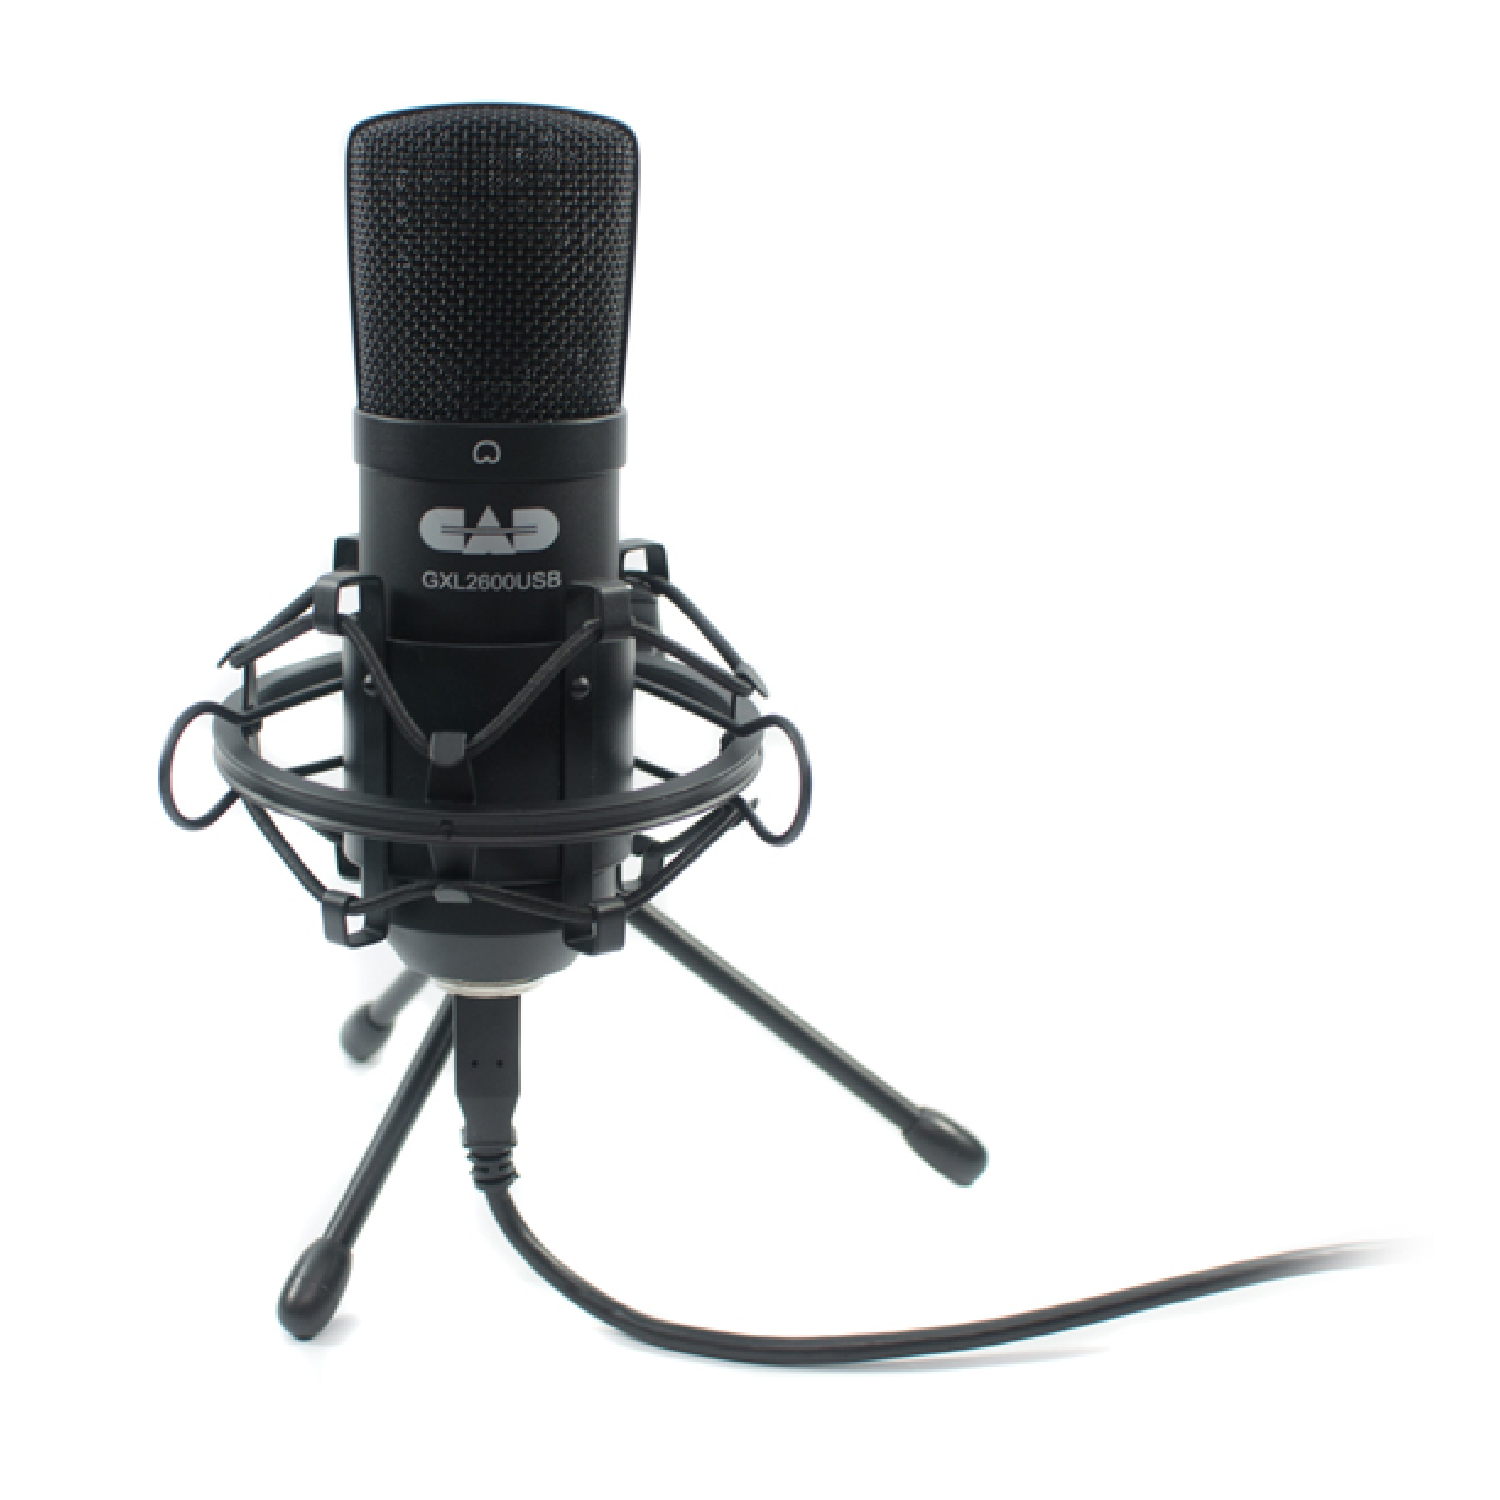 USB Large Diaphragm Studio Condenser Mic with Tripod Stand 10 Feet USB Cable   GXL2600USB cad audio